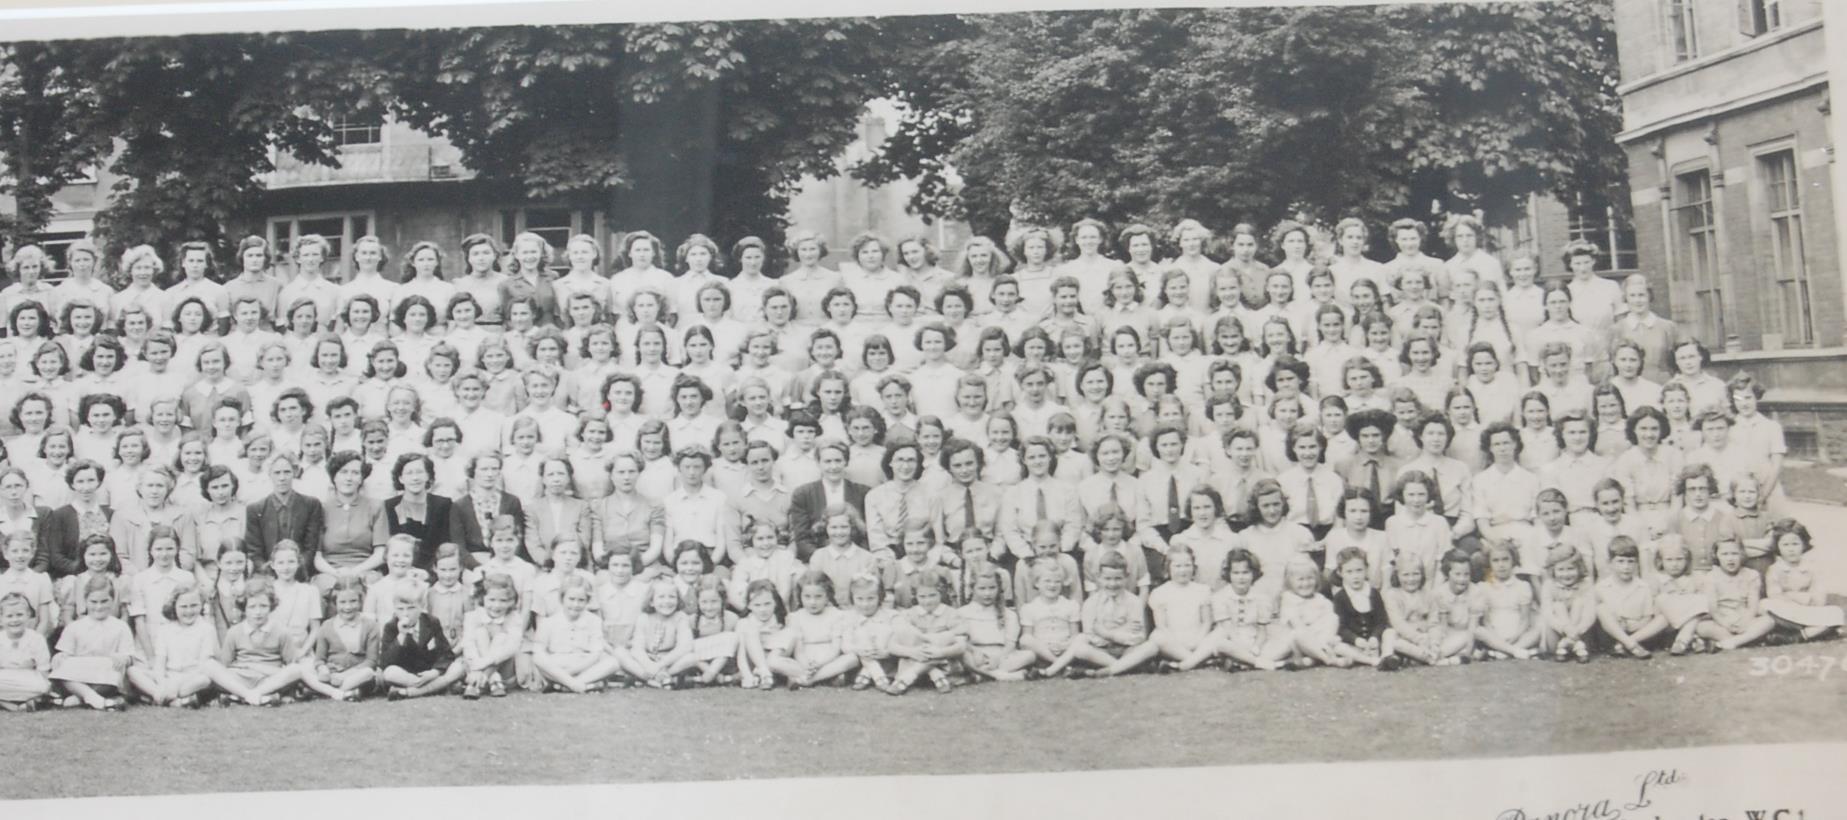 COOLECTION OF FOUR SCHOOL PHOTGRAPHS OF CLIFTON HIGH SCHOOL FOR GIRLS - Image 10 of 18